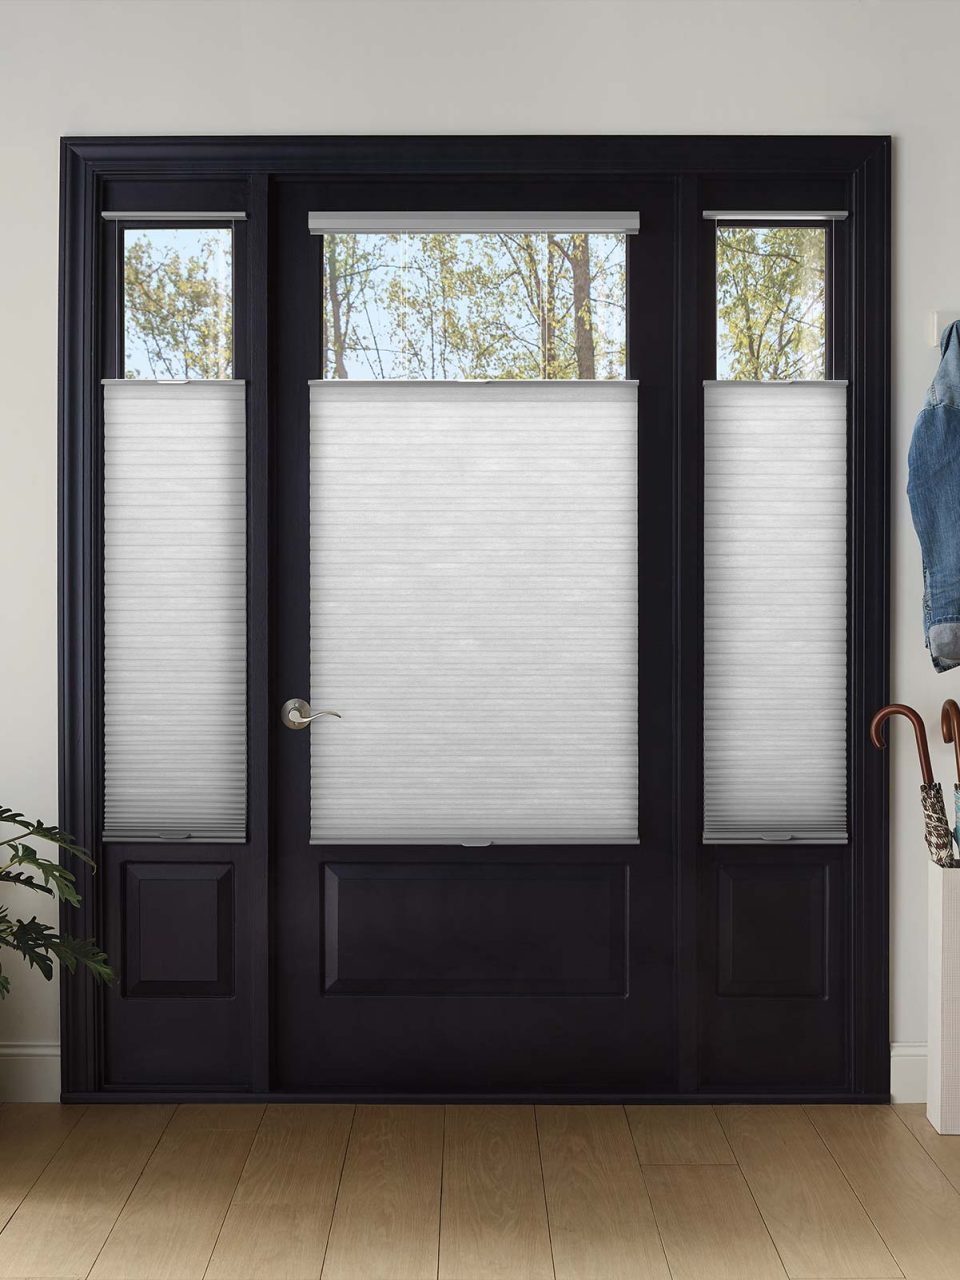 Hunter Douglas Honeycomb Shades with Top-Down/Bottom-Up Operating System